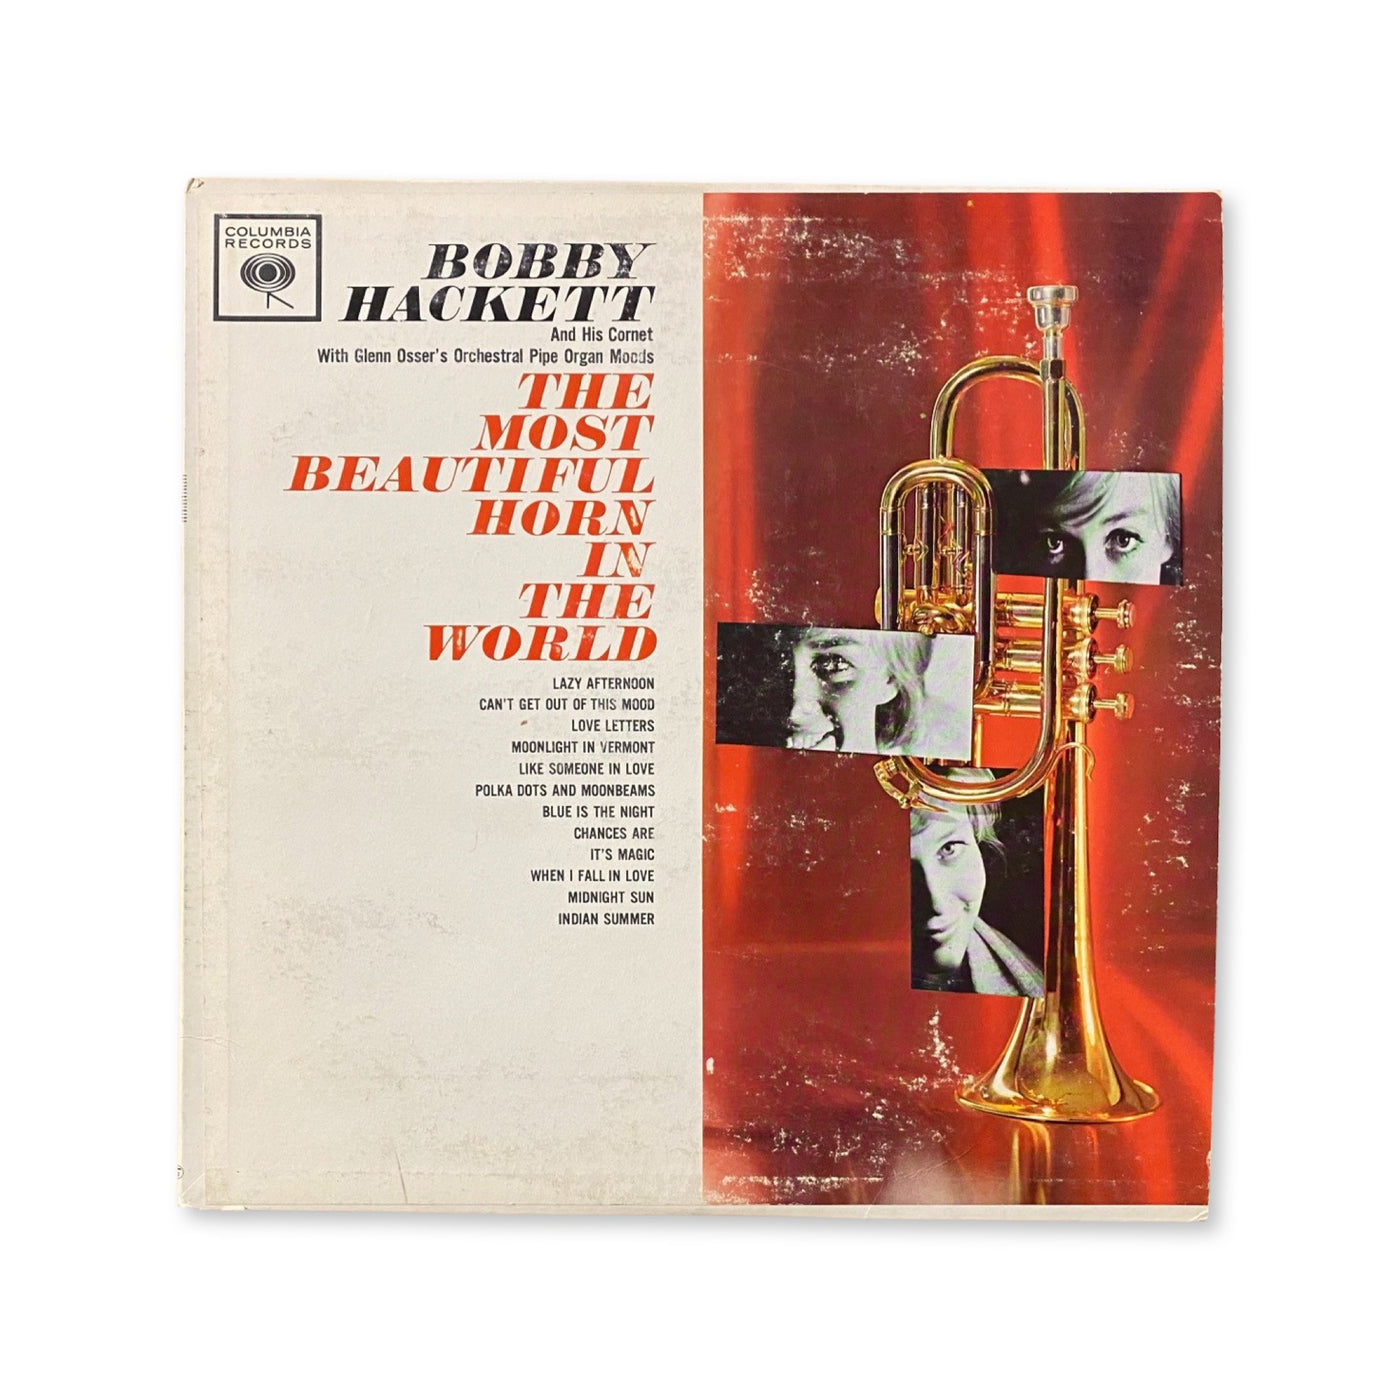 Bobby Hackett With Glenn Osser - The Most Beautiful Horn In The World